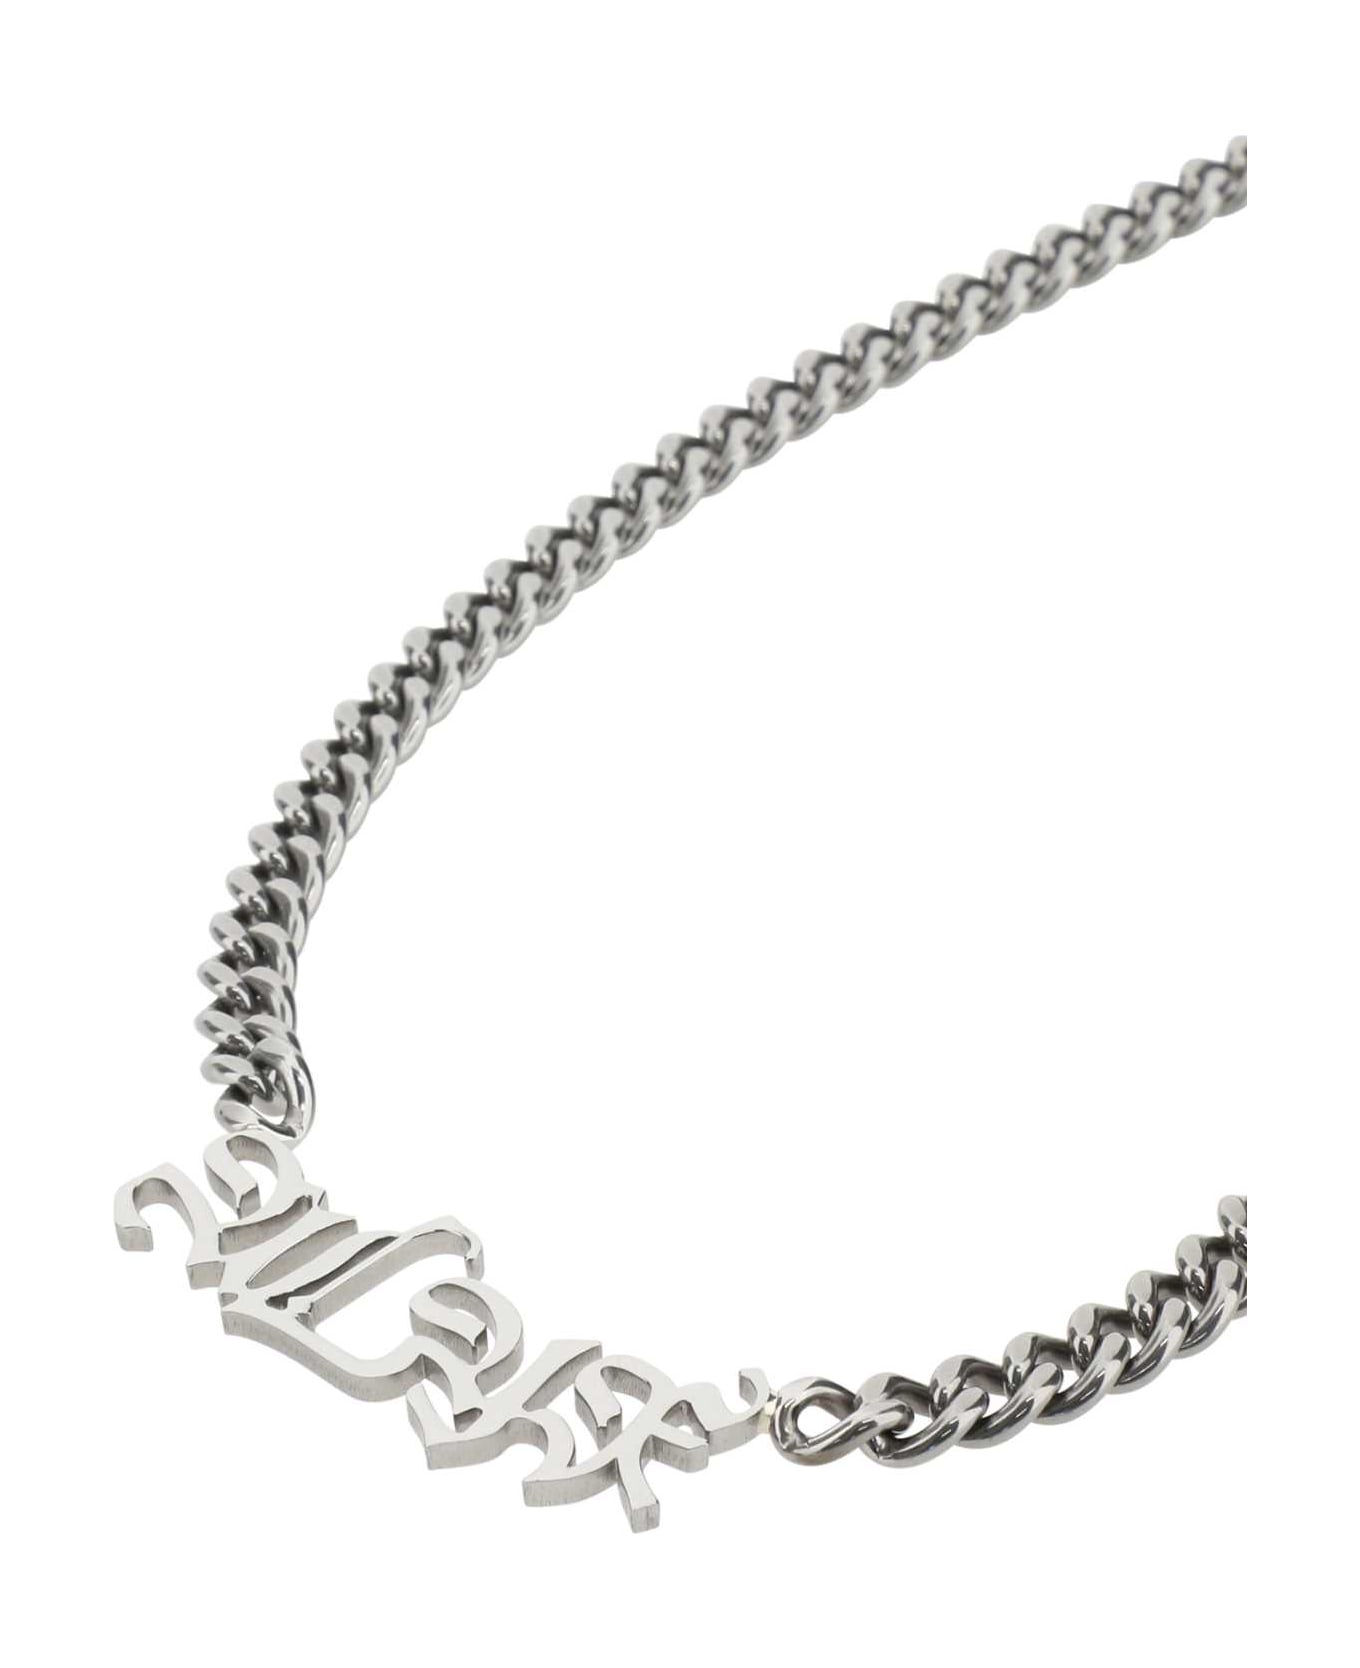 1017 ALYX 9SM Ruthenium Metal Necklace - GRY0002 ネックレス